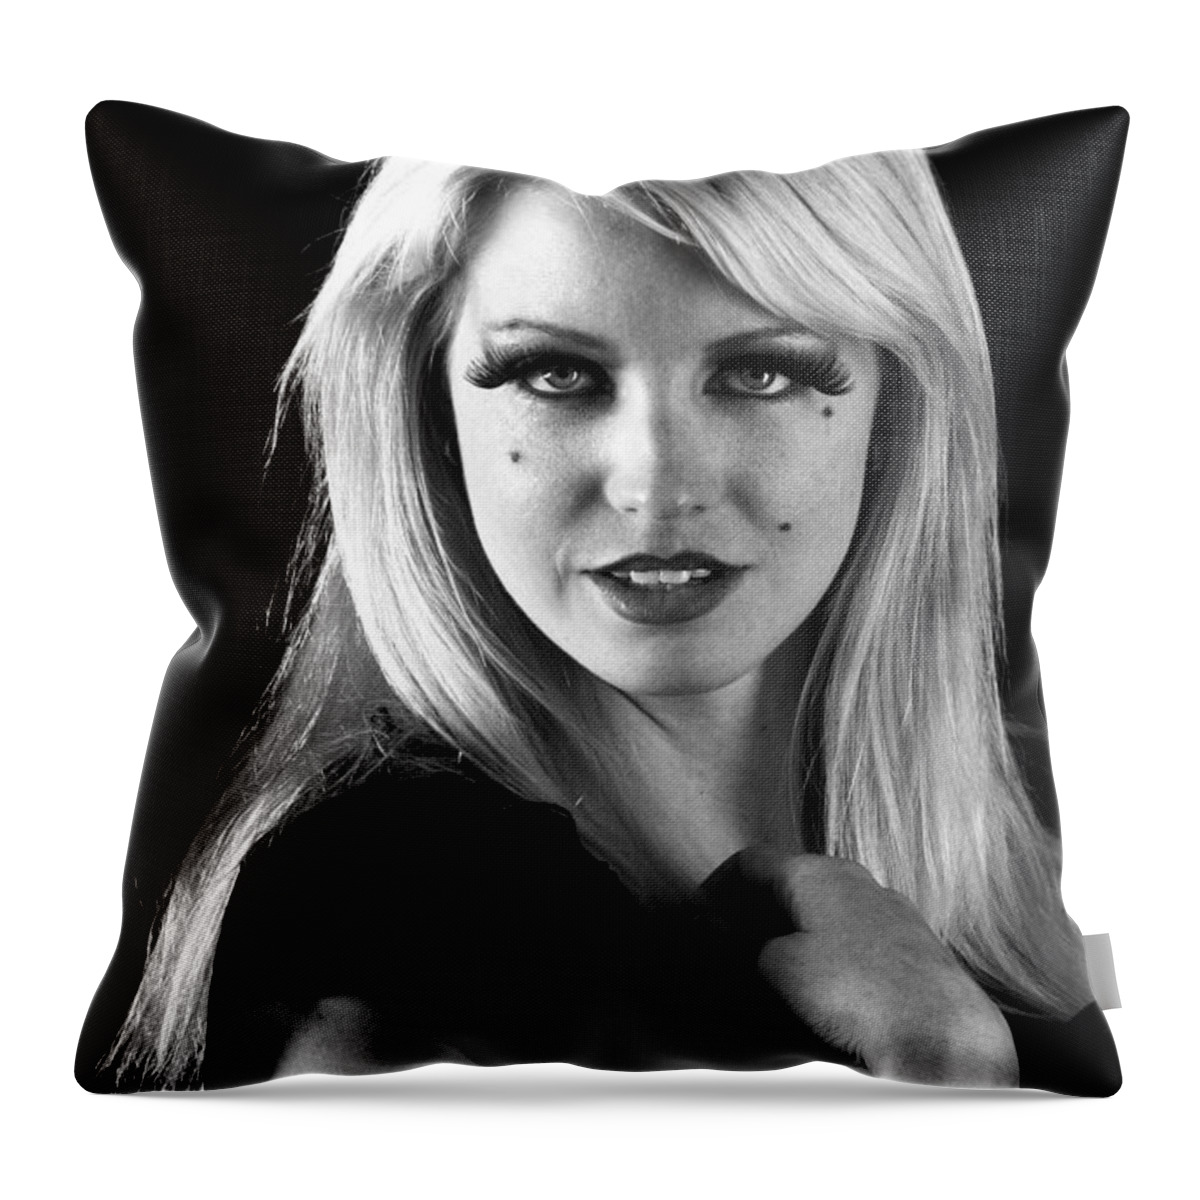 Glamour Photographs Throw Pillow featuring the photograph Tenderhearted by Robert WK Clark